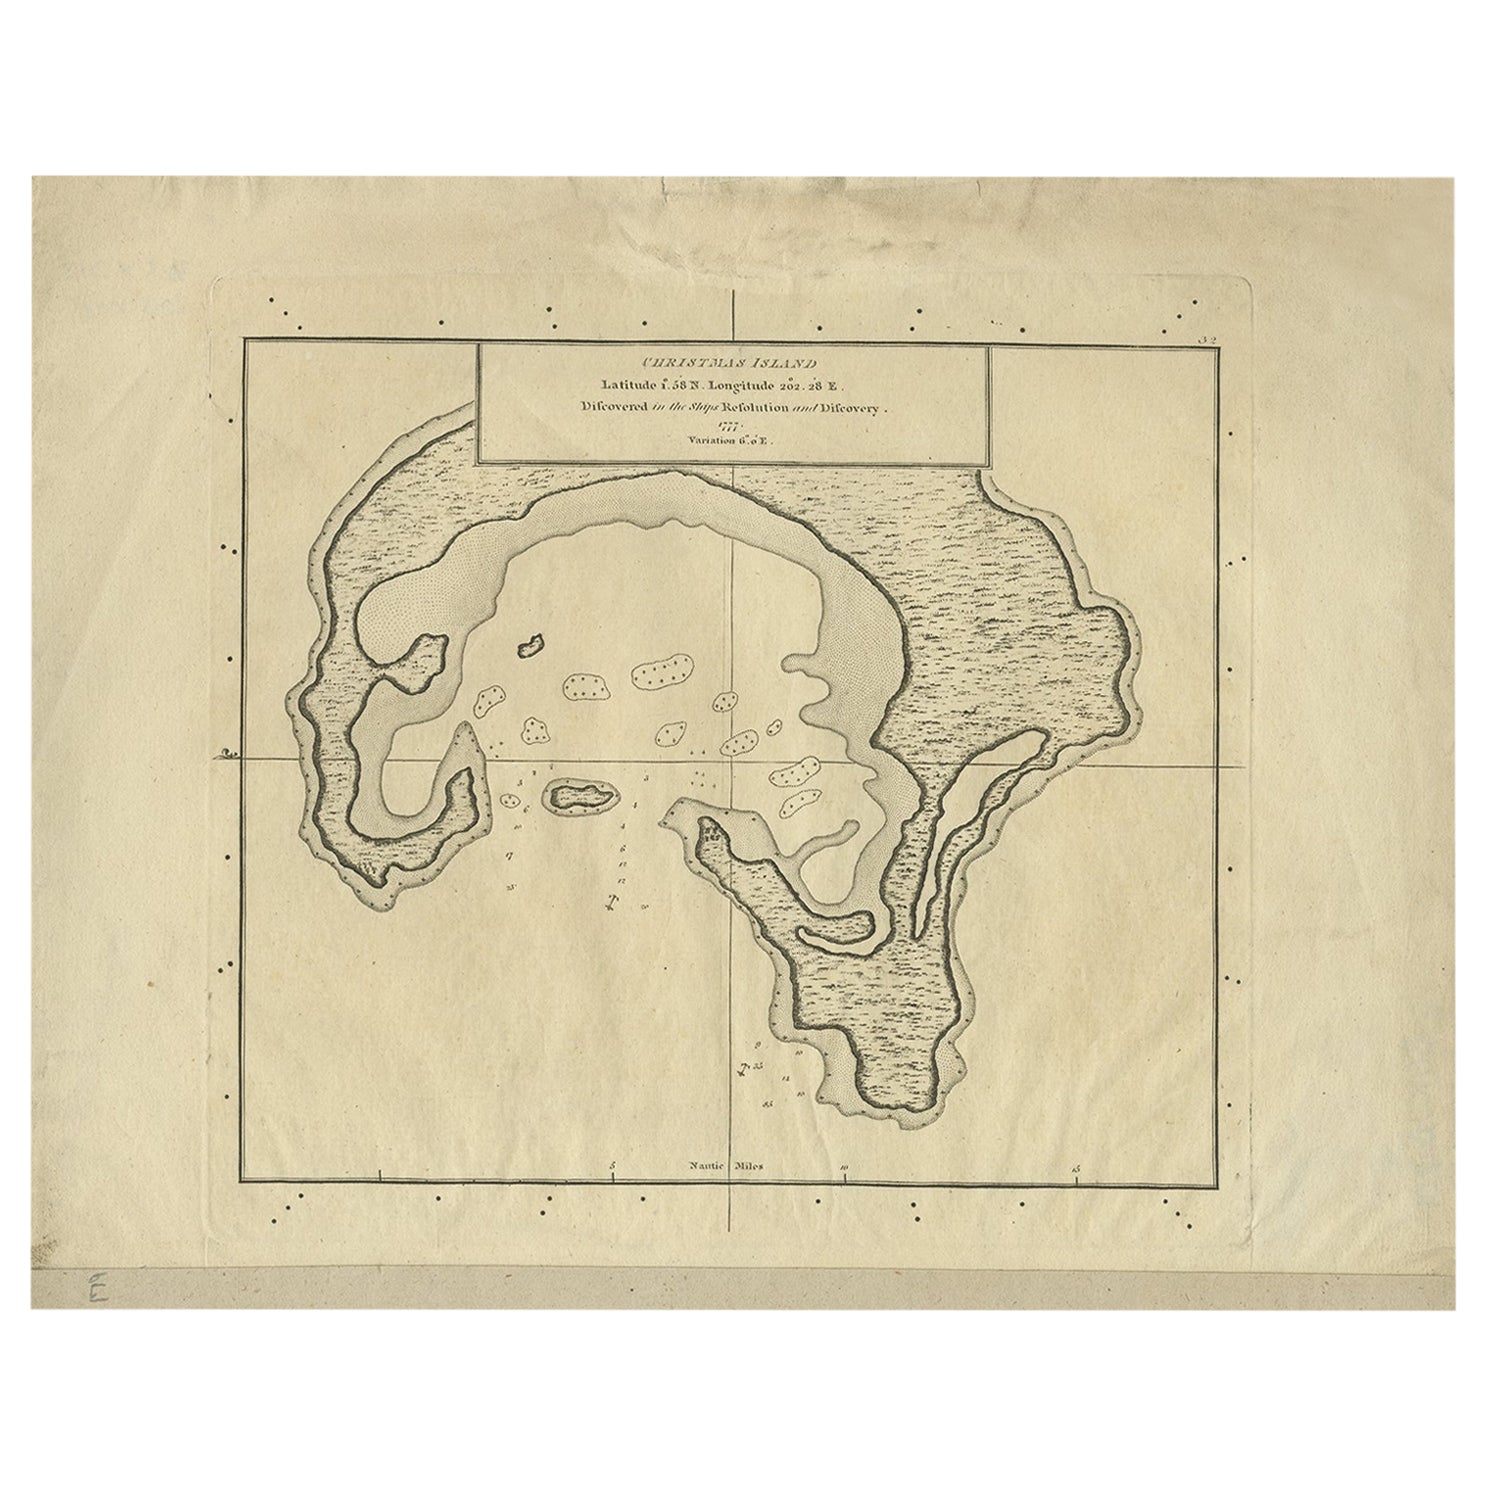 Antique Map of Christmas Island by Cook, 1784